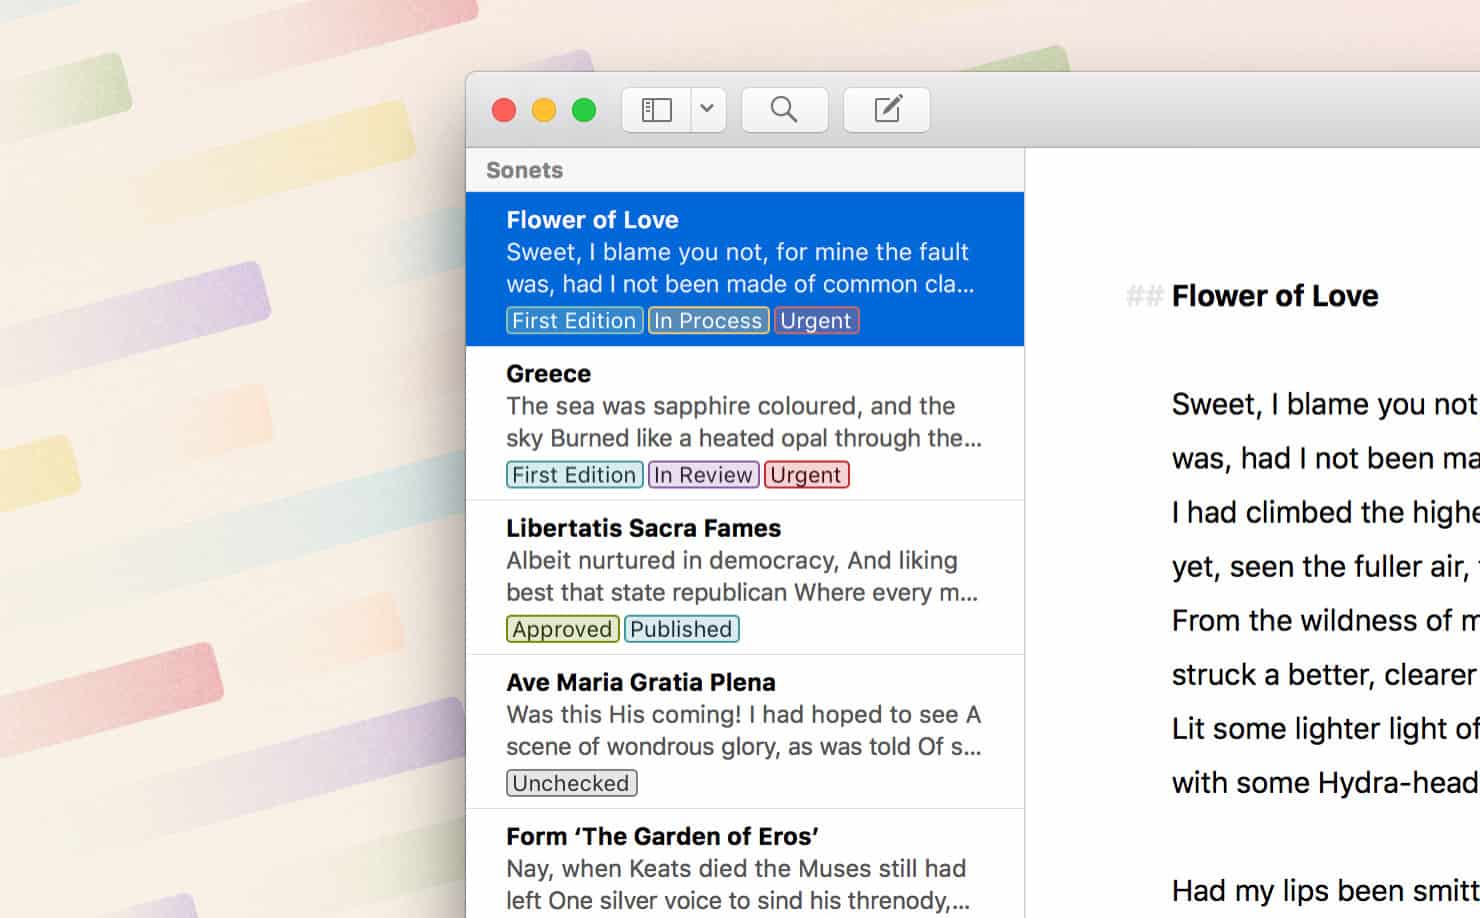 The Ulysses writing app adds colored keywords